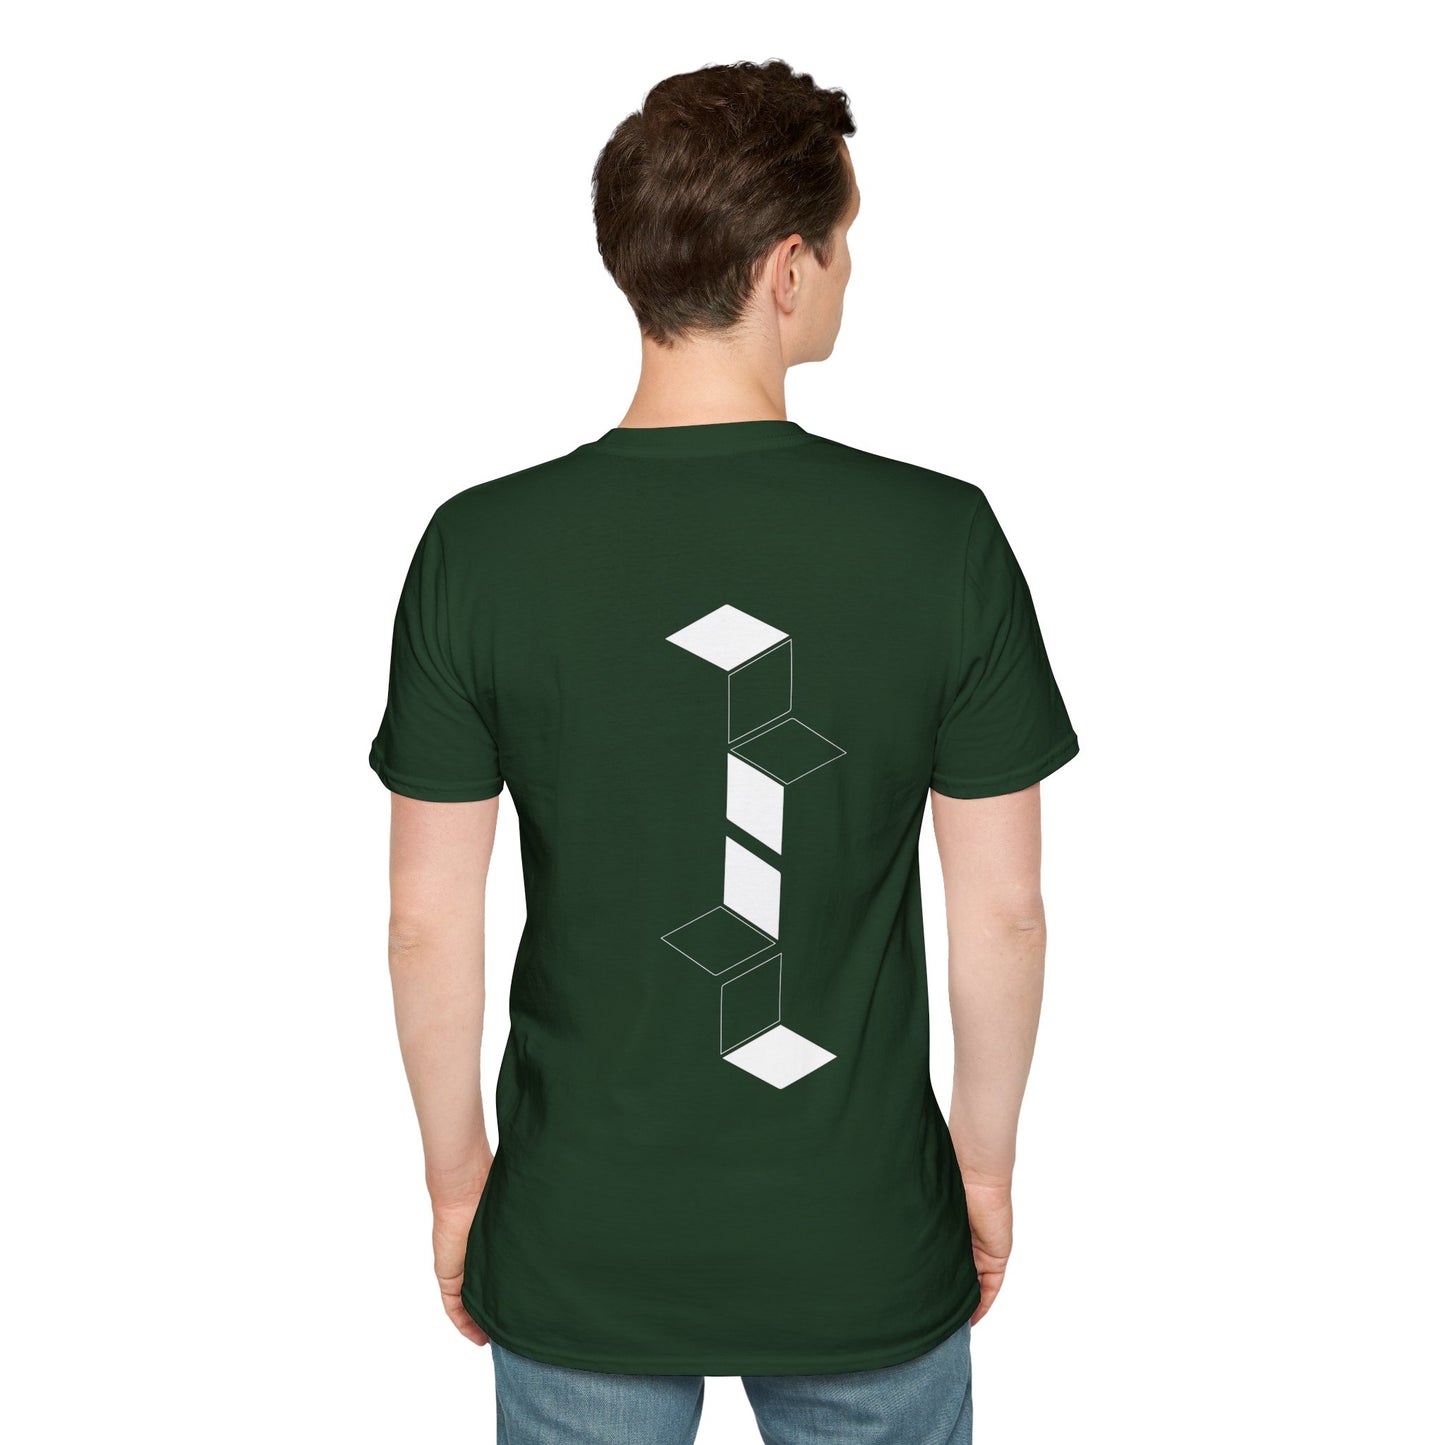 Green  T-shirt with white geometric cube pattern creating a 3D optical illusion